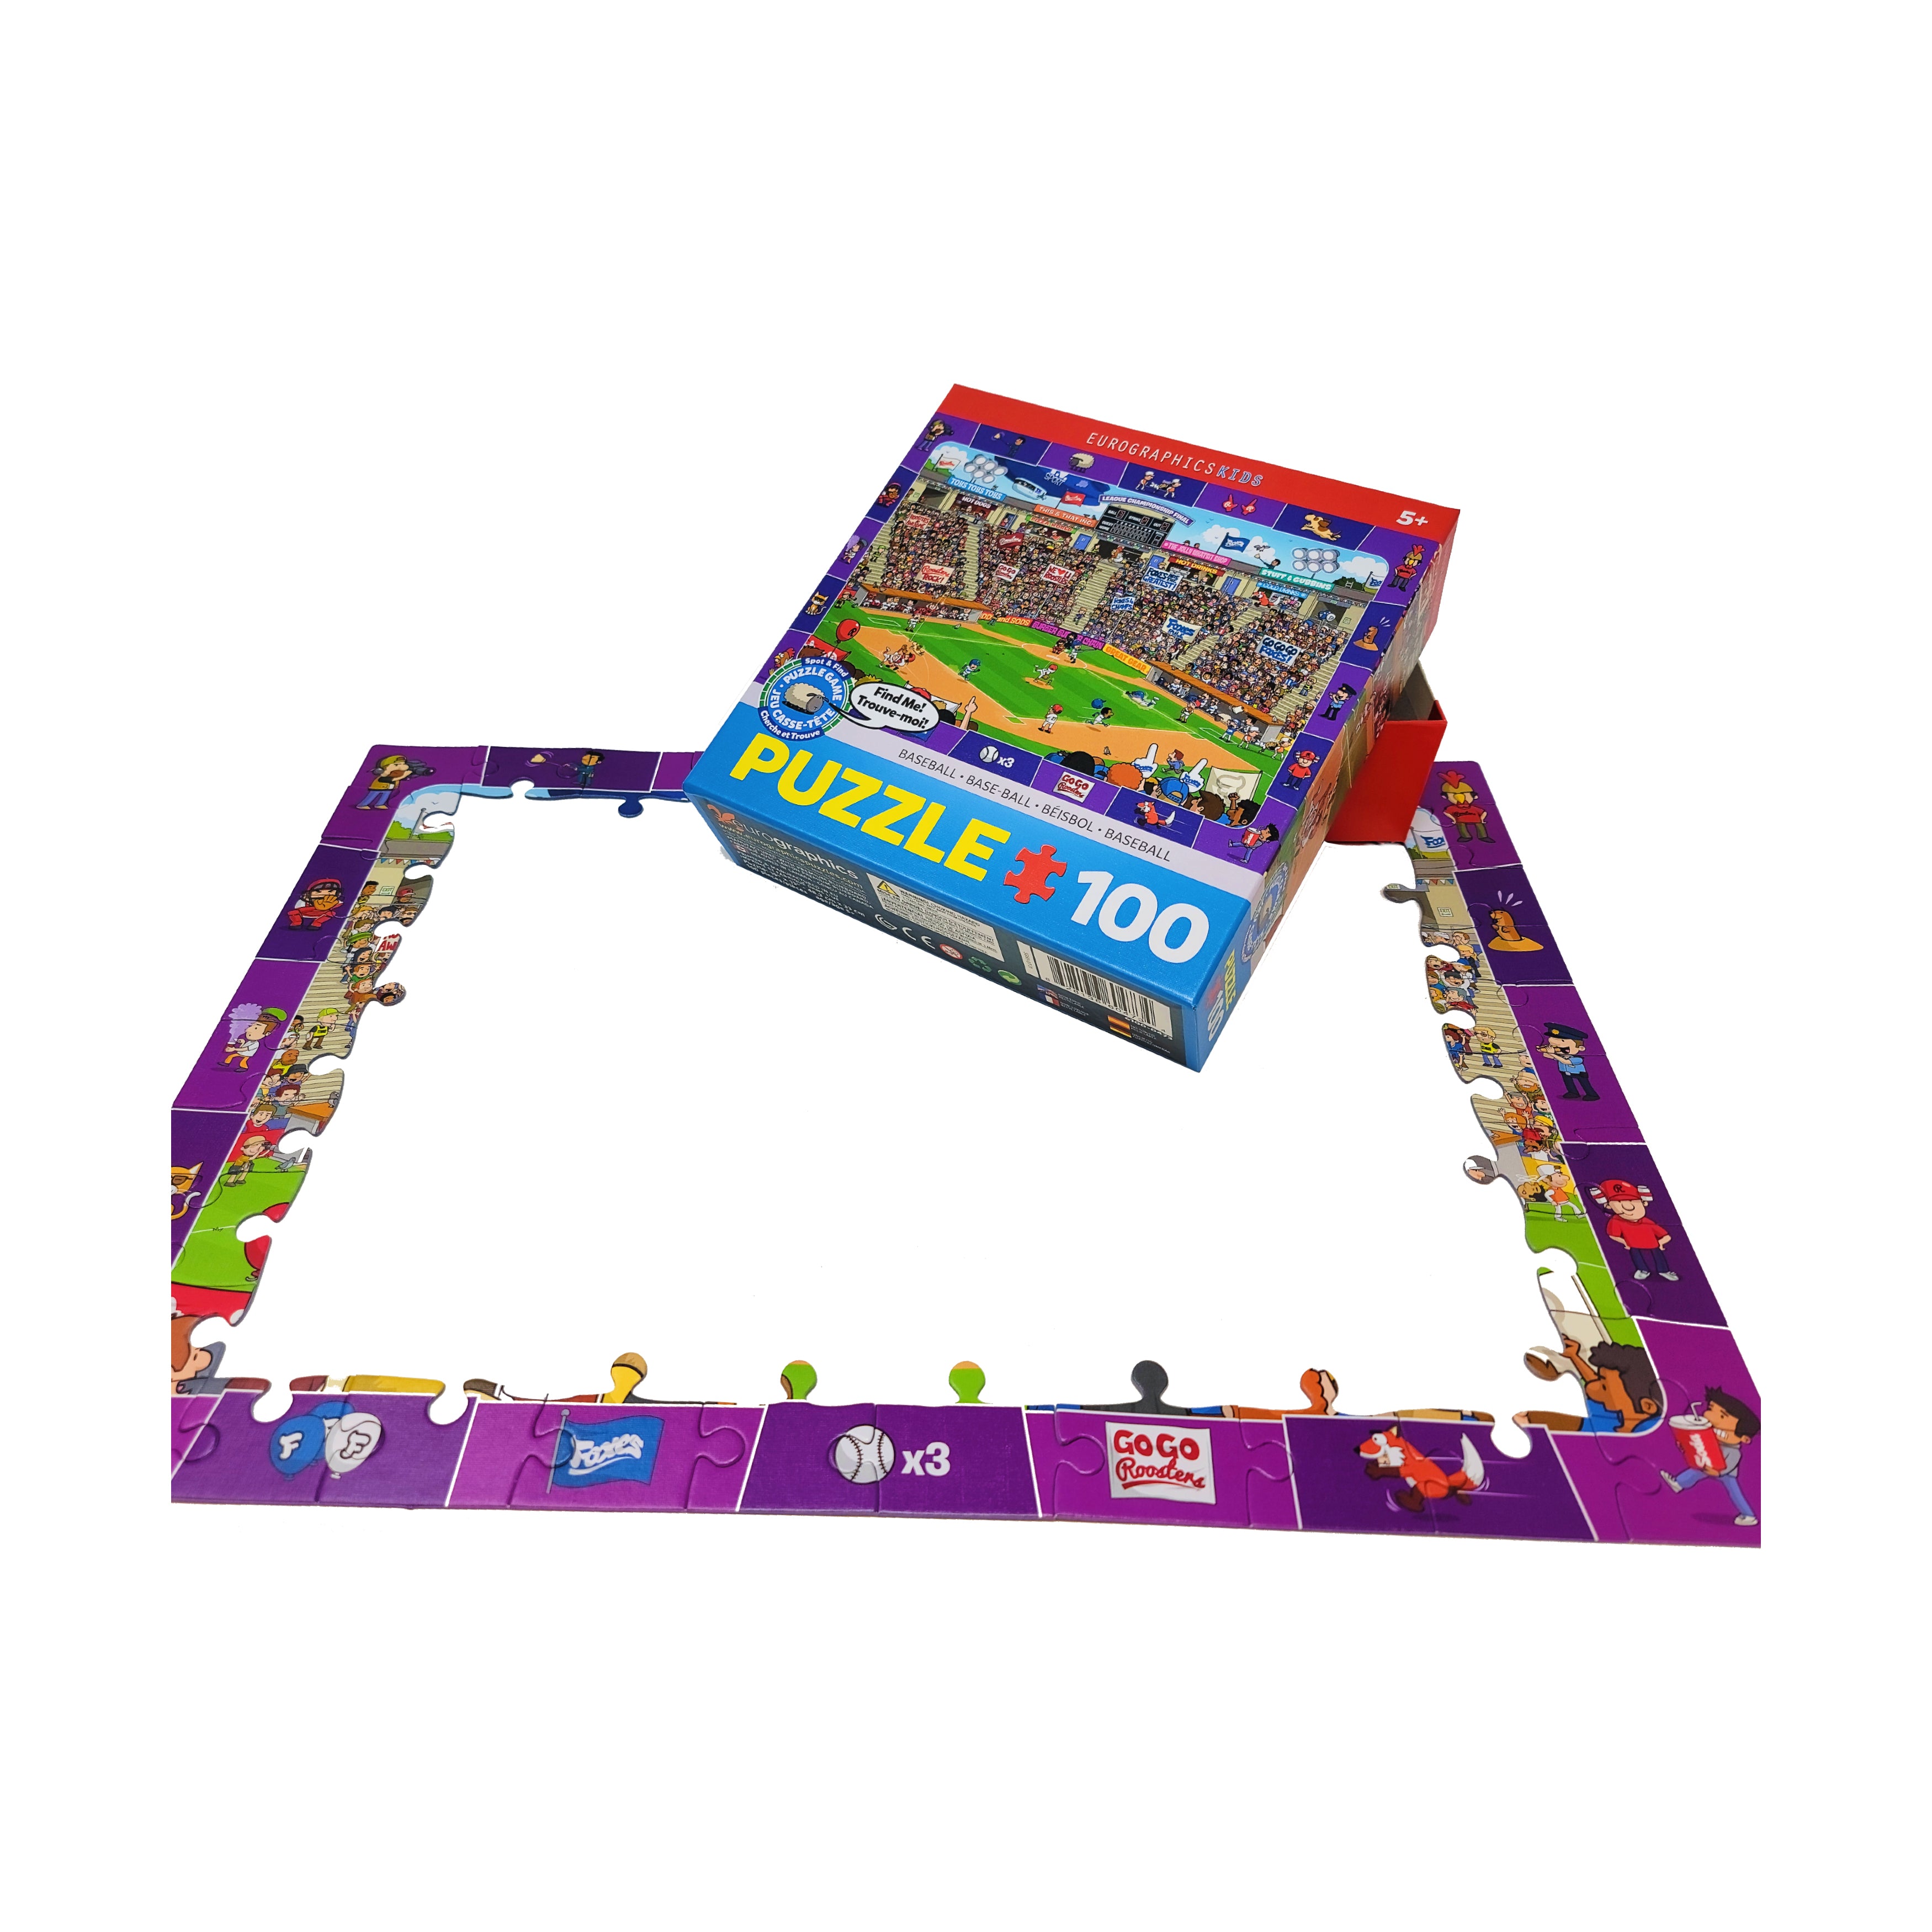 EuroGraphics Football Spot & Find Puzzle (100-Piece) (6100-0474)